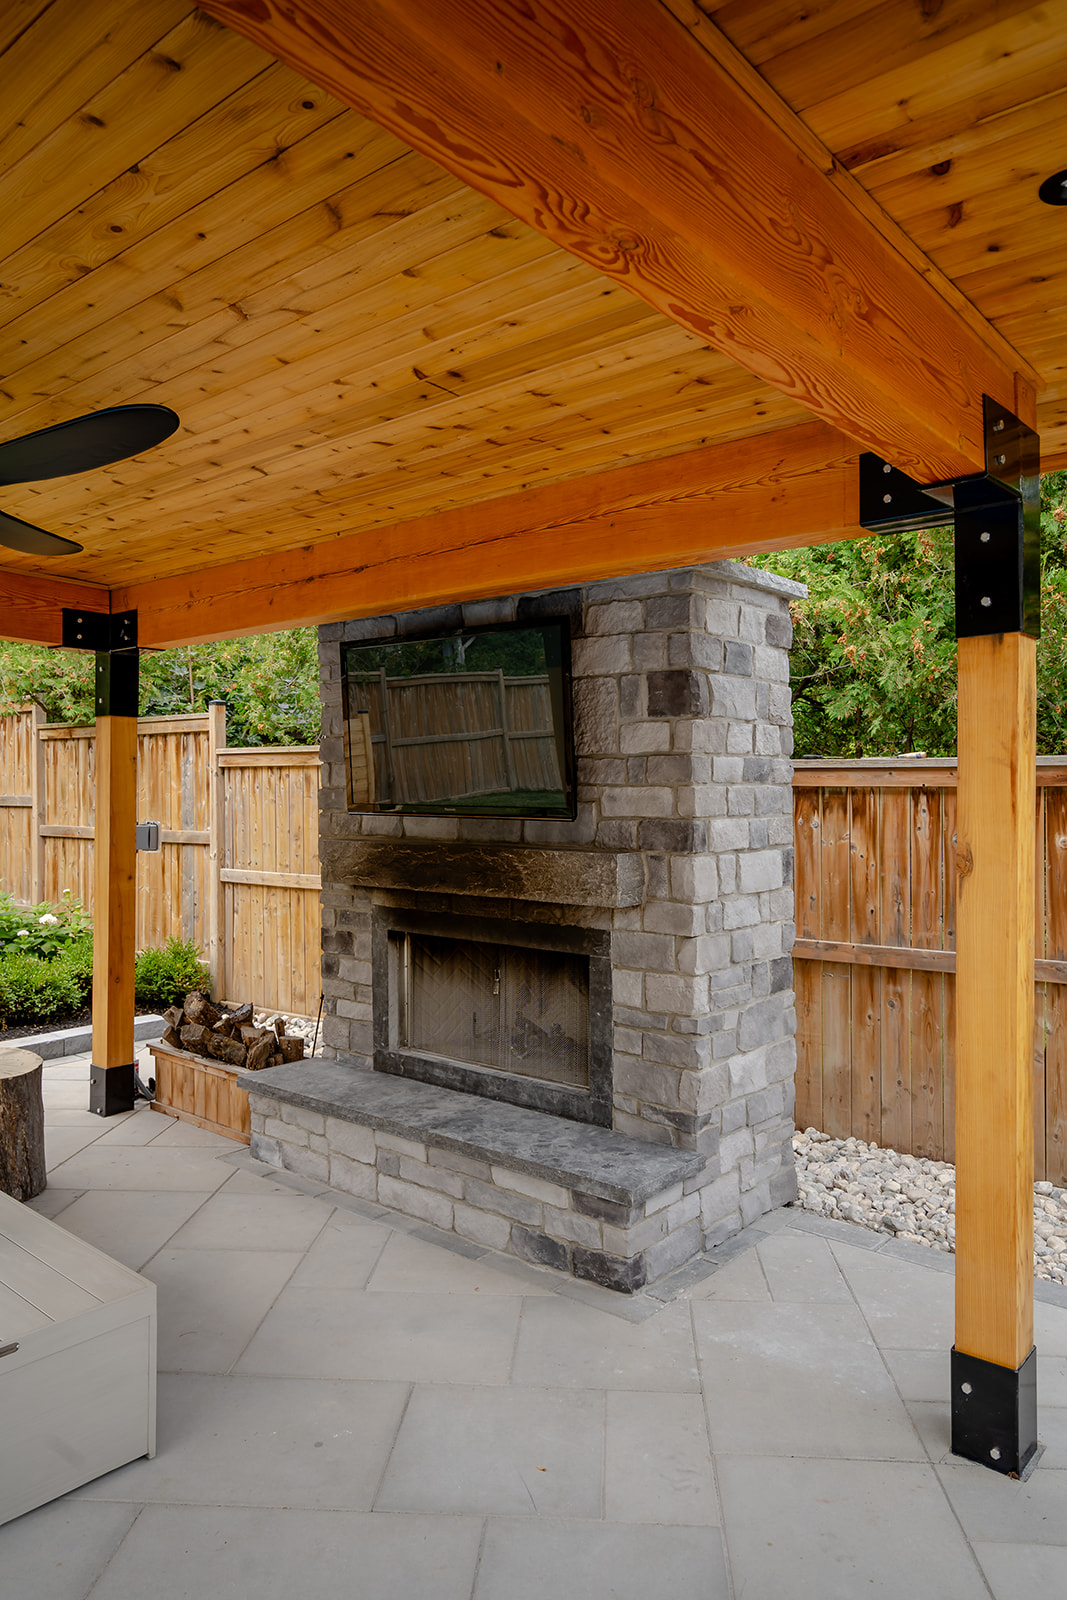 A large tv mounted to the brick wall underneath the gazebo.